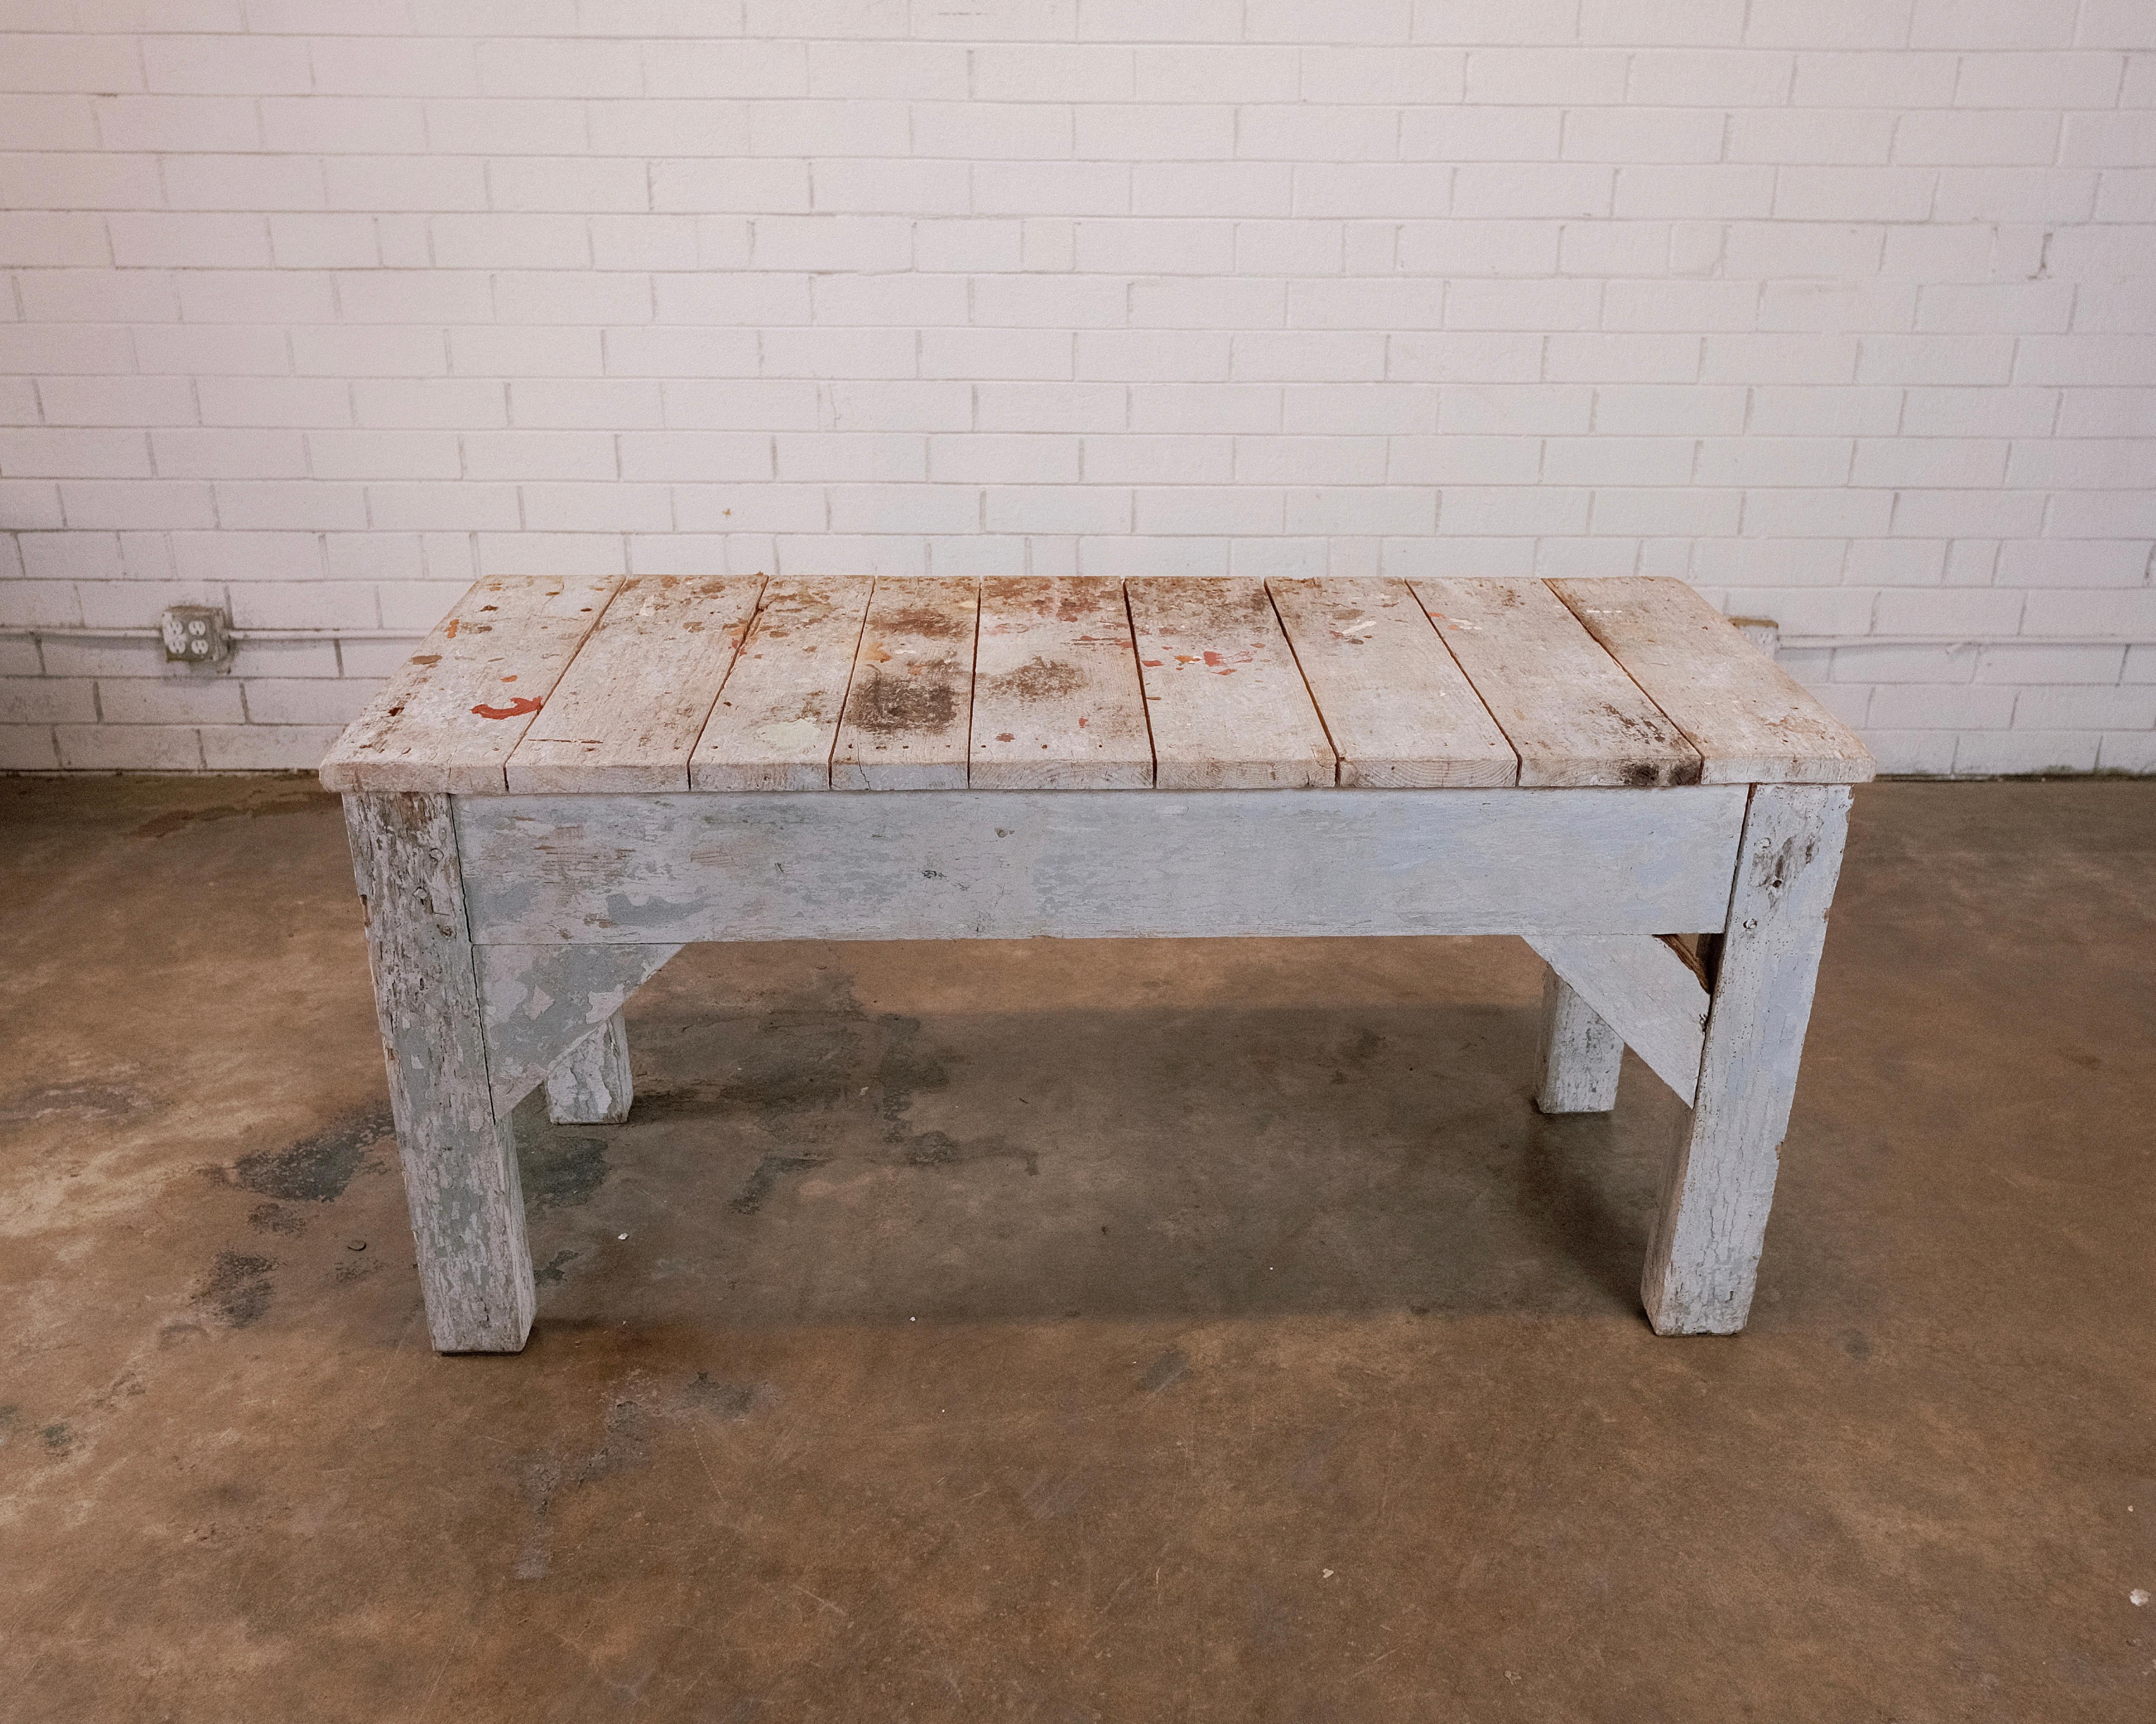 Primitive Painted Blue Workshop Table, a vintage piece that emanates old-world charm and character. Crafted with a utilitarian purpose, this table showcases a hand-painted blue finish that has gracefully aged over time, adding a layer of